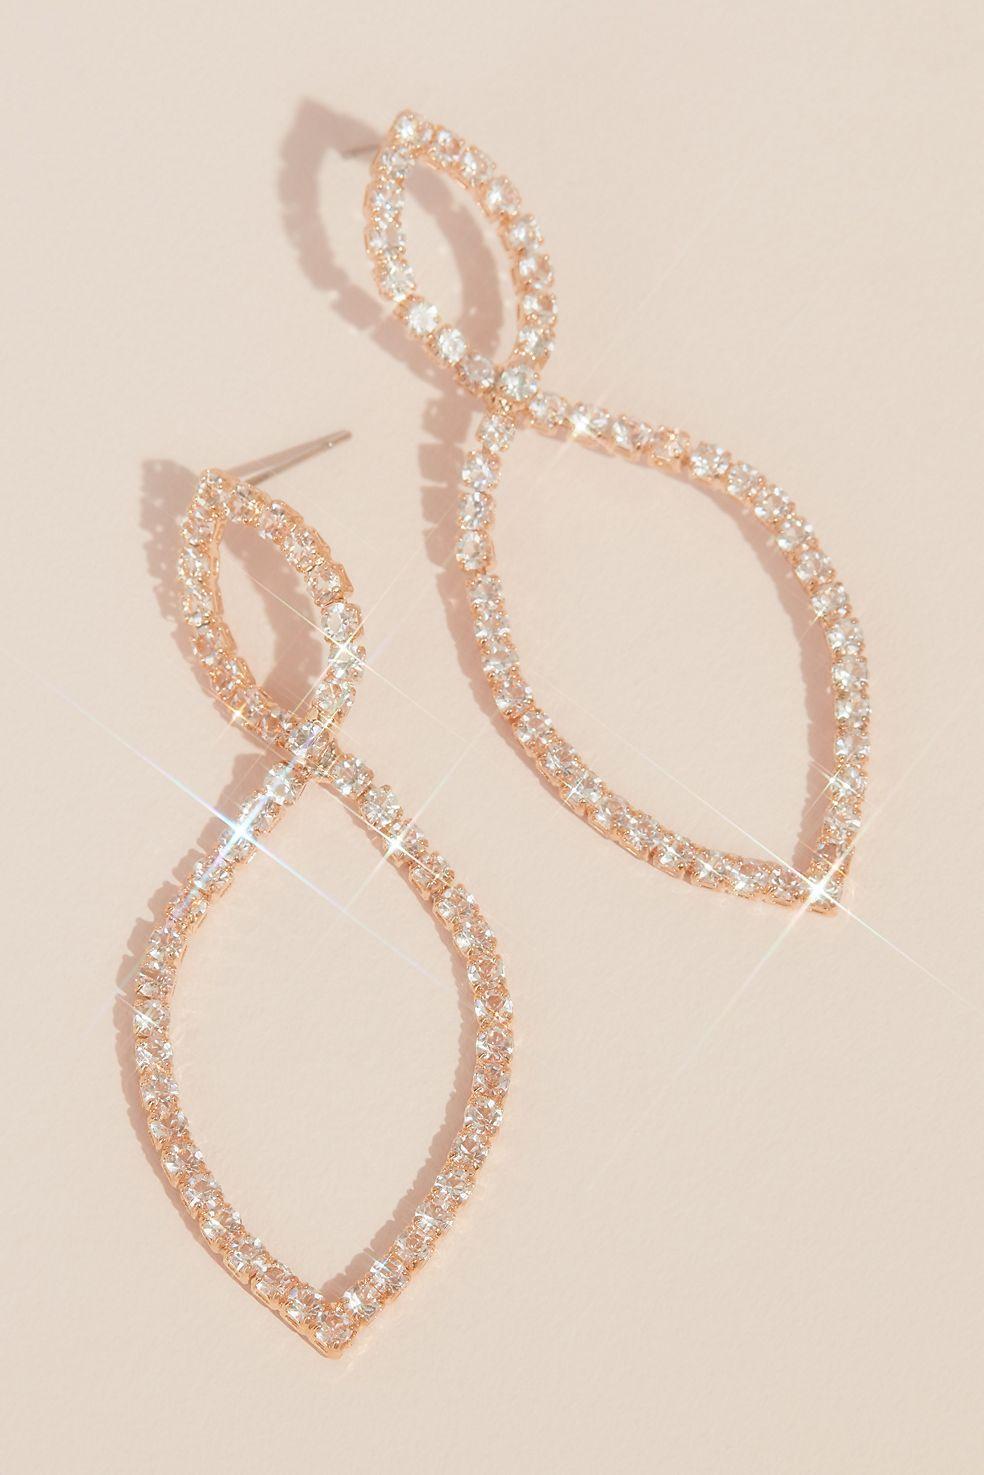 Rose Gold, Dusty Rose, Pink, Crystal Drop Earrings, Crystal Cluster Earrings, Rose Gold Wedding, Bridesmaid Gift, Pierced